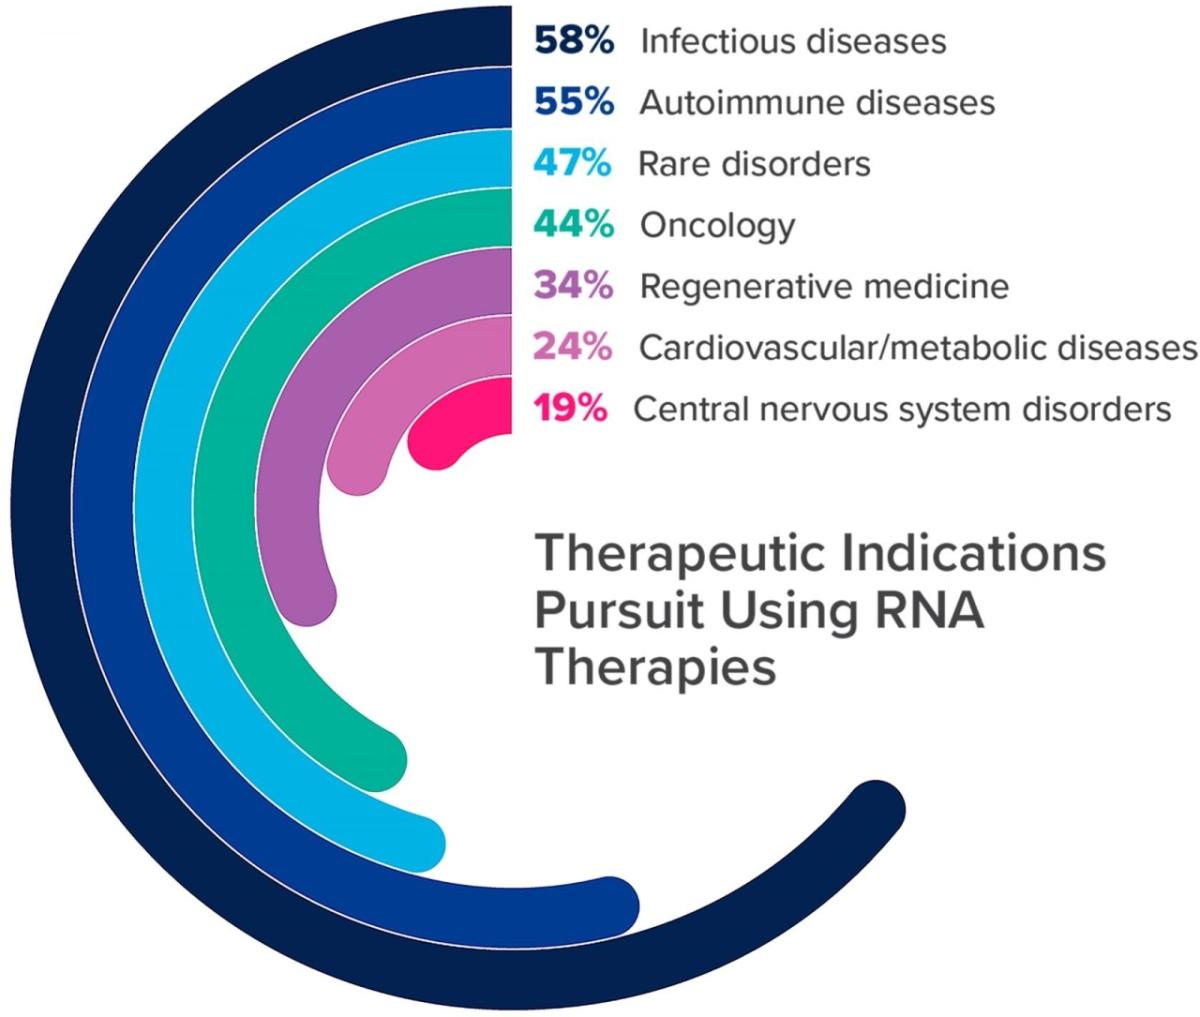 Circular bar graph showing percentages of Therapeutic Indications Pursuit Using RNA Therapies